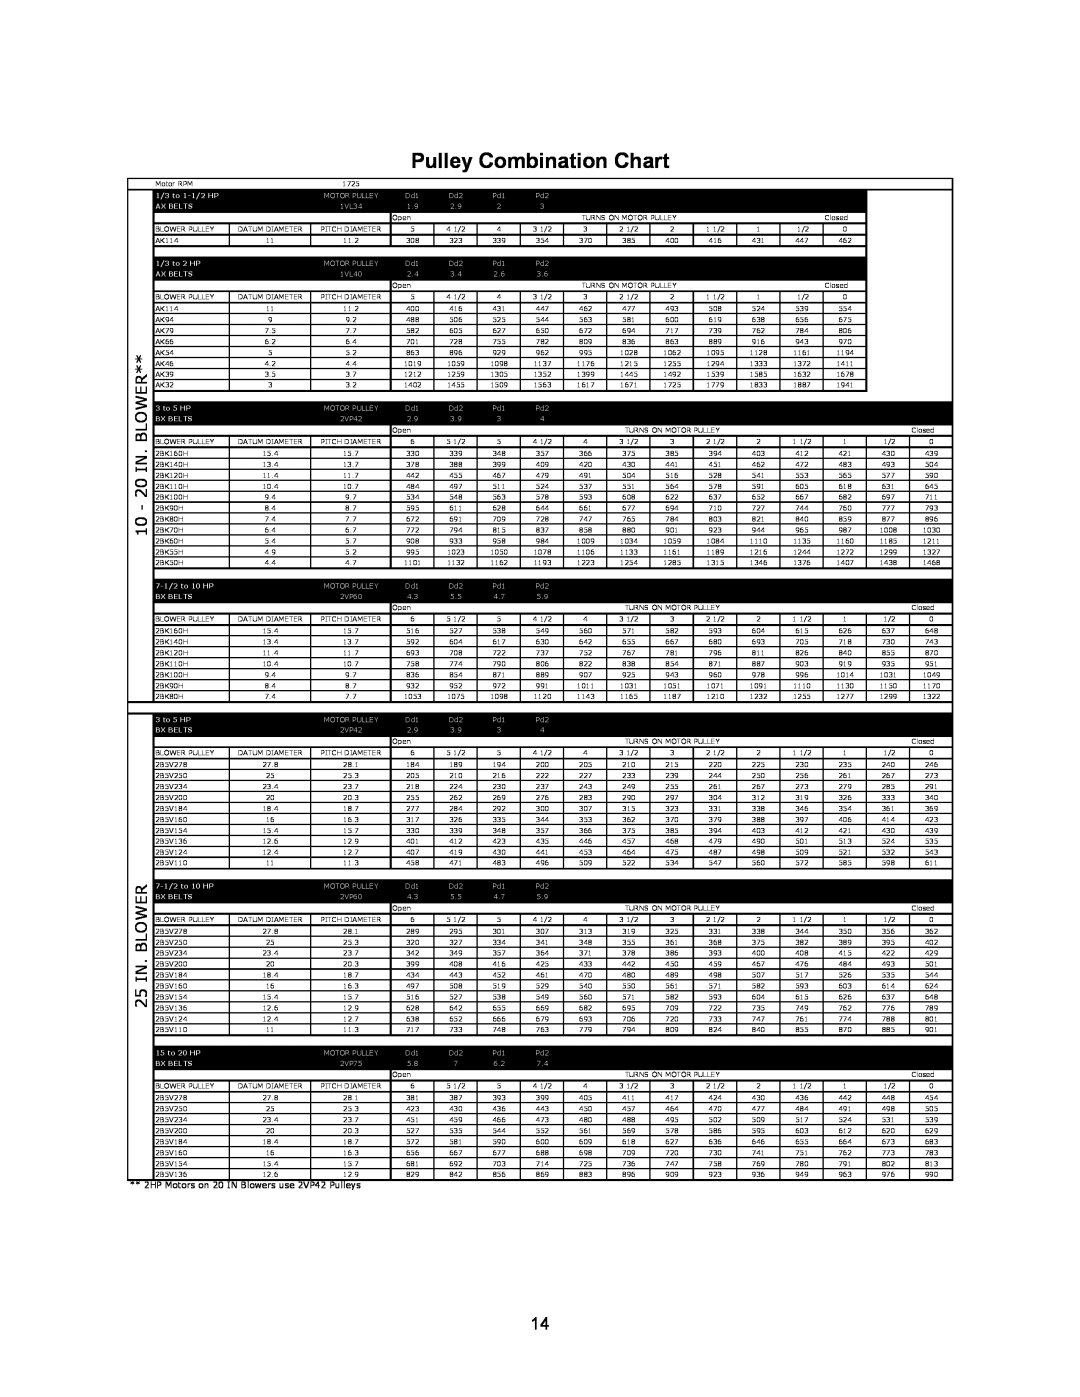 Energy Tech Laboratories Modular Direct Fired Heaters manual Pulley Combination Chart, 10 - 20 IN. BLOWER 